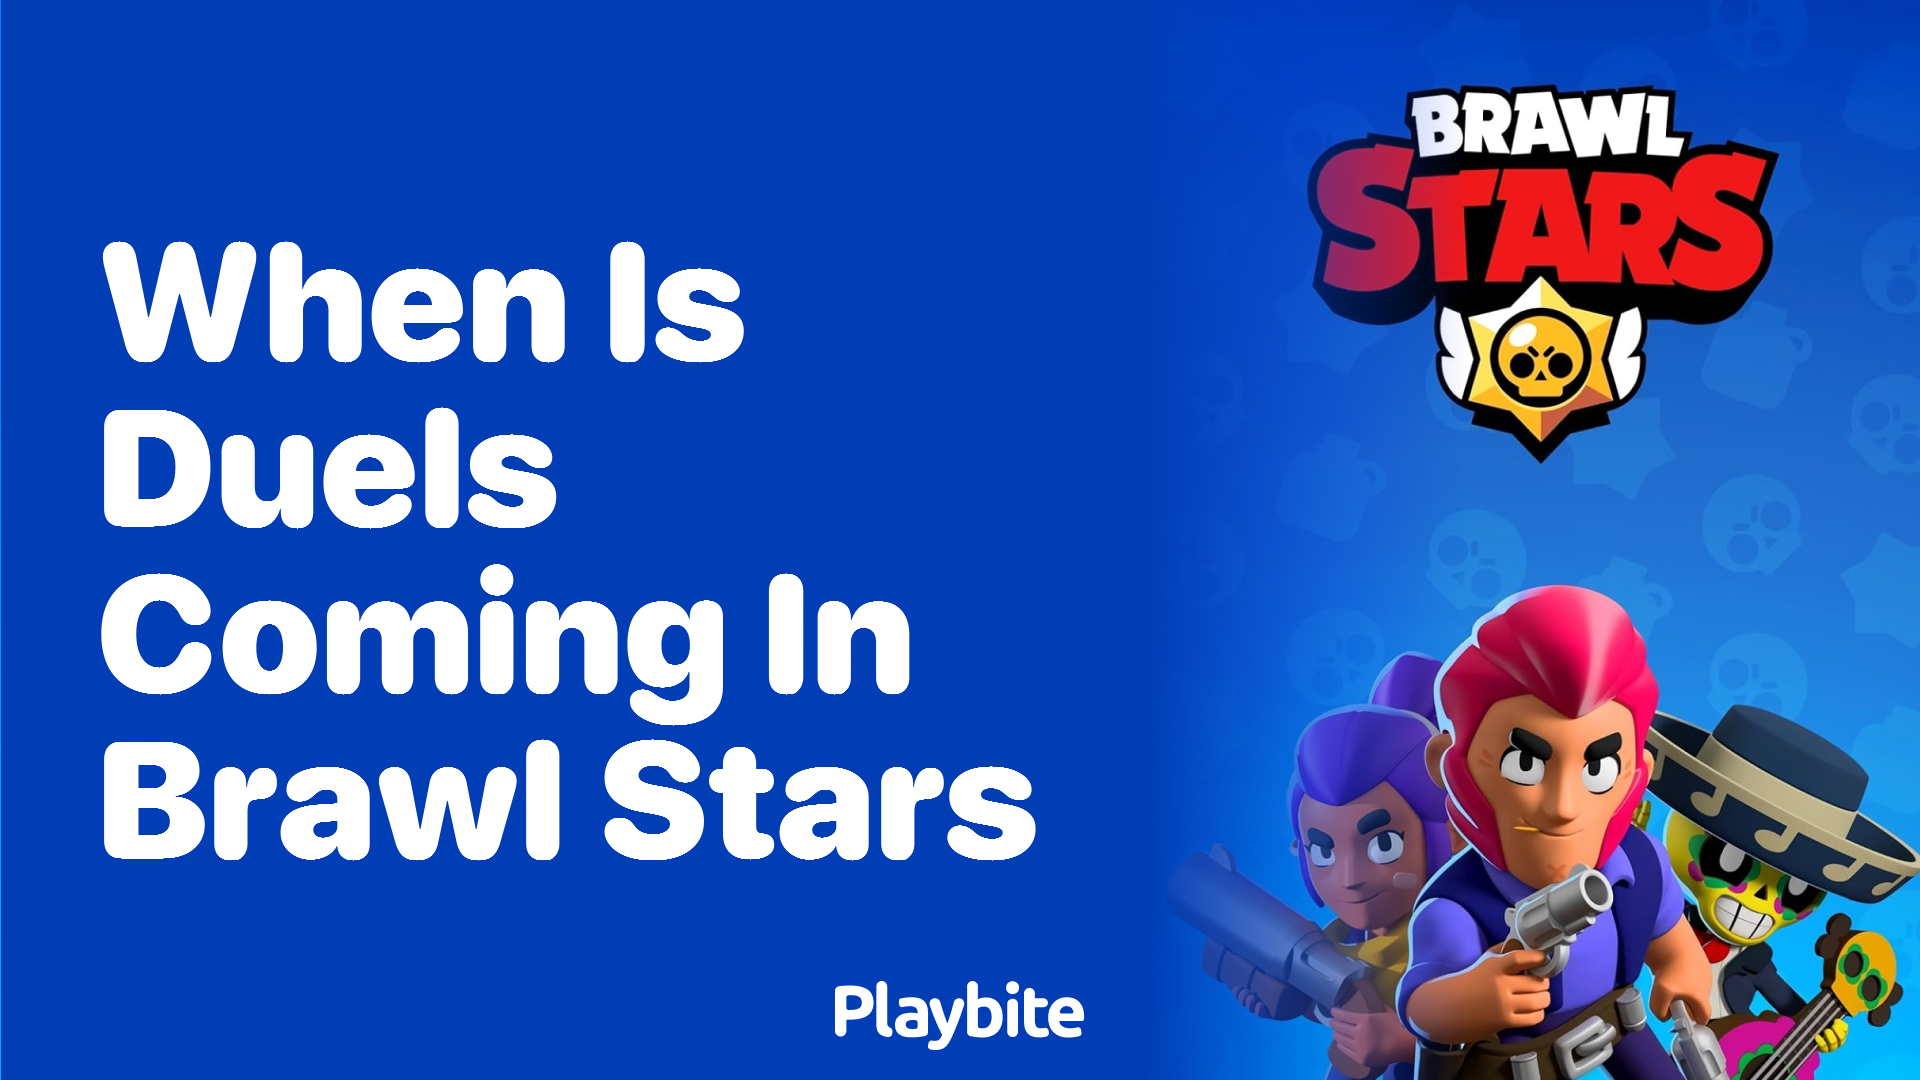 When Is Duels Coming in Brawl Stars?